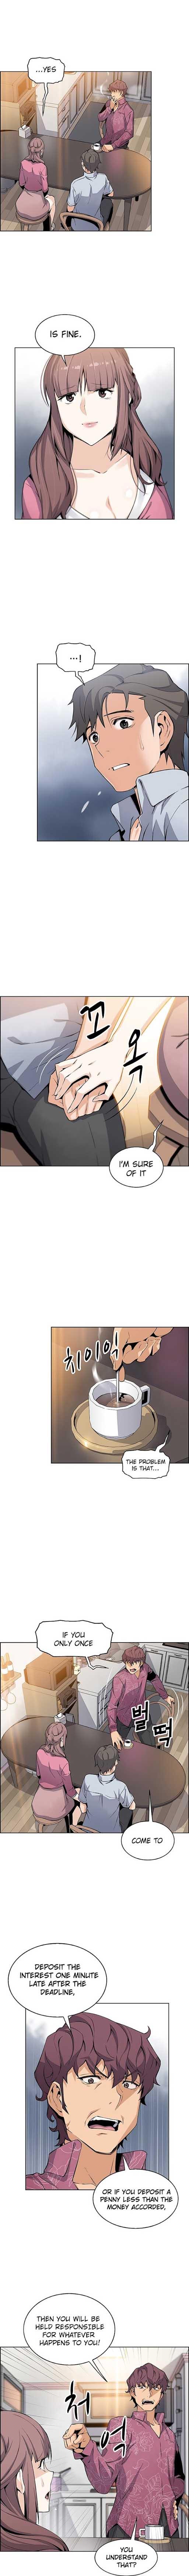 Housekeeper [Neck Pillow, Paper] Ch.49/49 [English] [Manhwa PDF] Completed 254